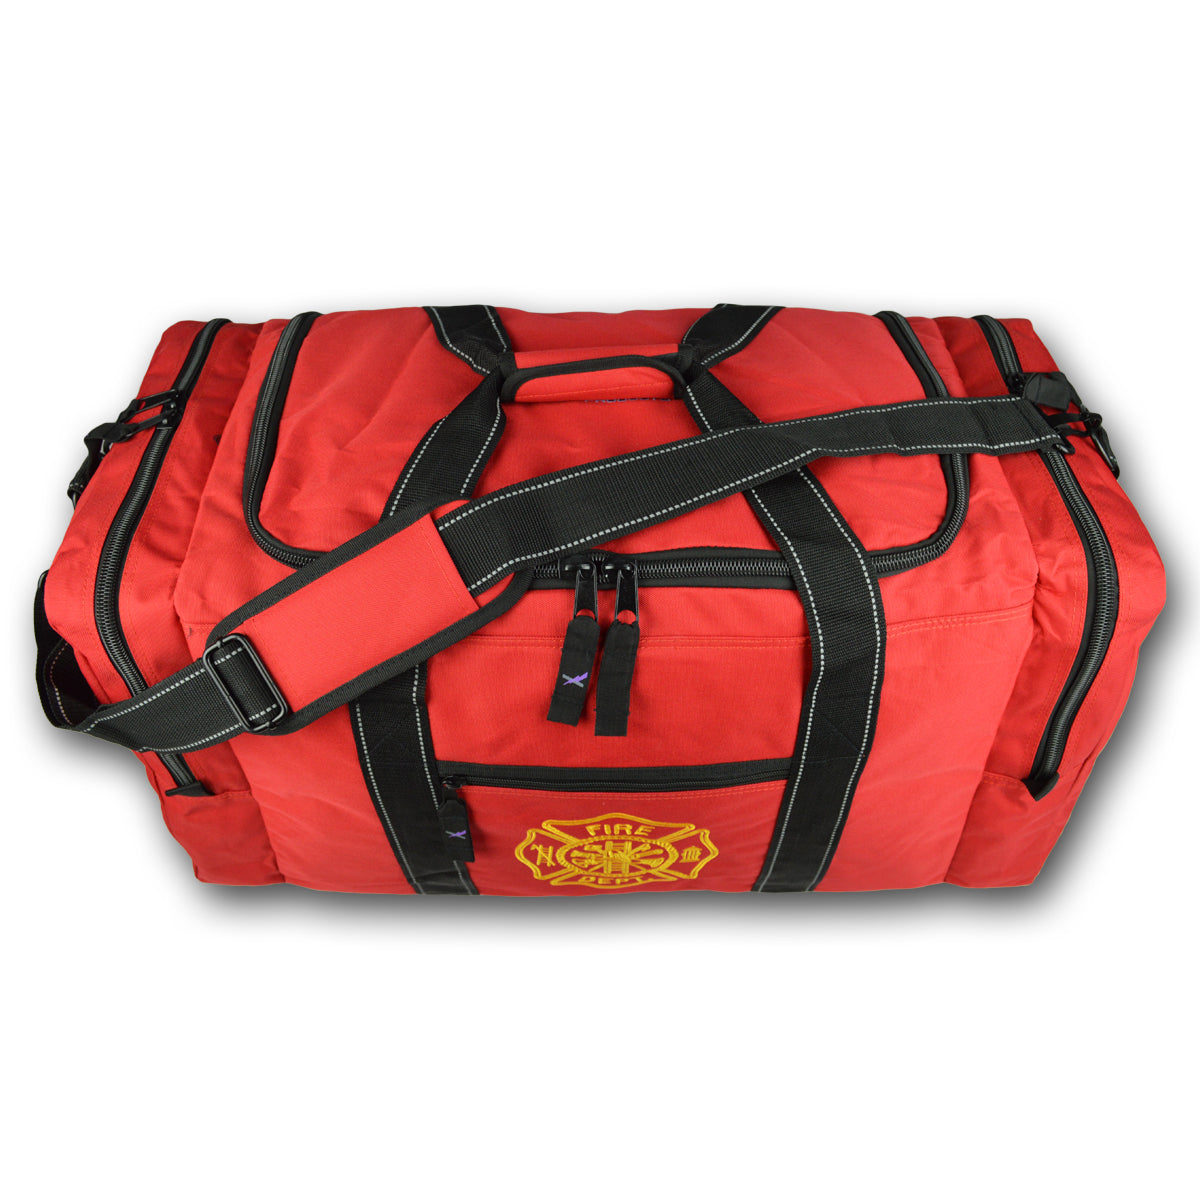 Lightning X Value Step-In Turnout Gear Bag (LXFB40) | The Fire Center | Fuego Fire Center | FIREFIGHTER GEAR | Lightning X Products strives to give you the absolute most amount of product for the least amount of money. The Value Series Gear Bags were designed to give you just that: the best value for your hard-earned dollar, without sacrificing quality. The Value Bags include nearly all of the same features as our deluxe gear bags but at substantially lower price. 